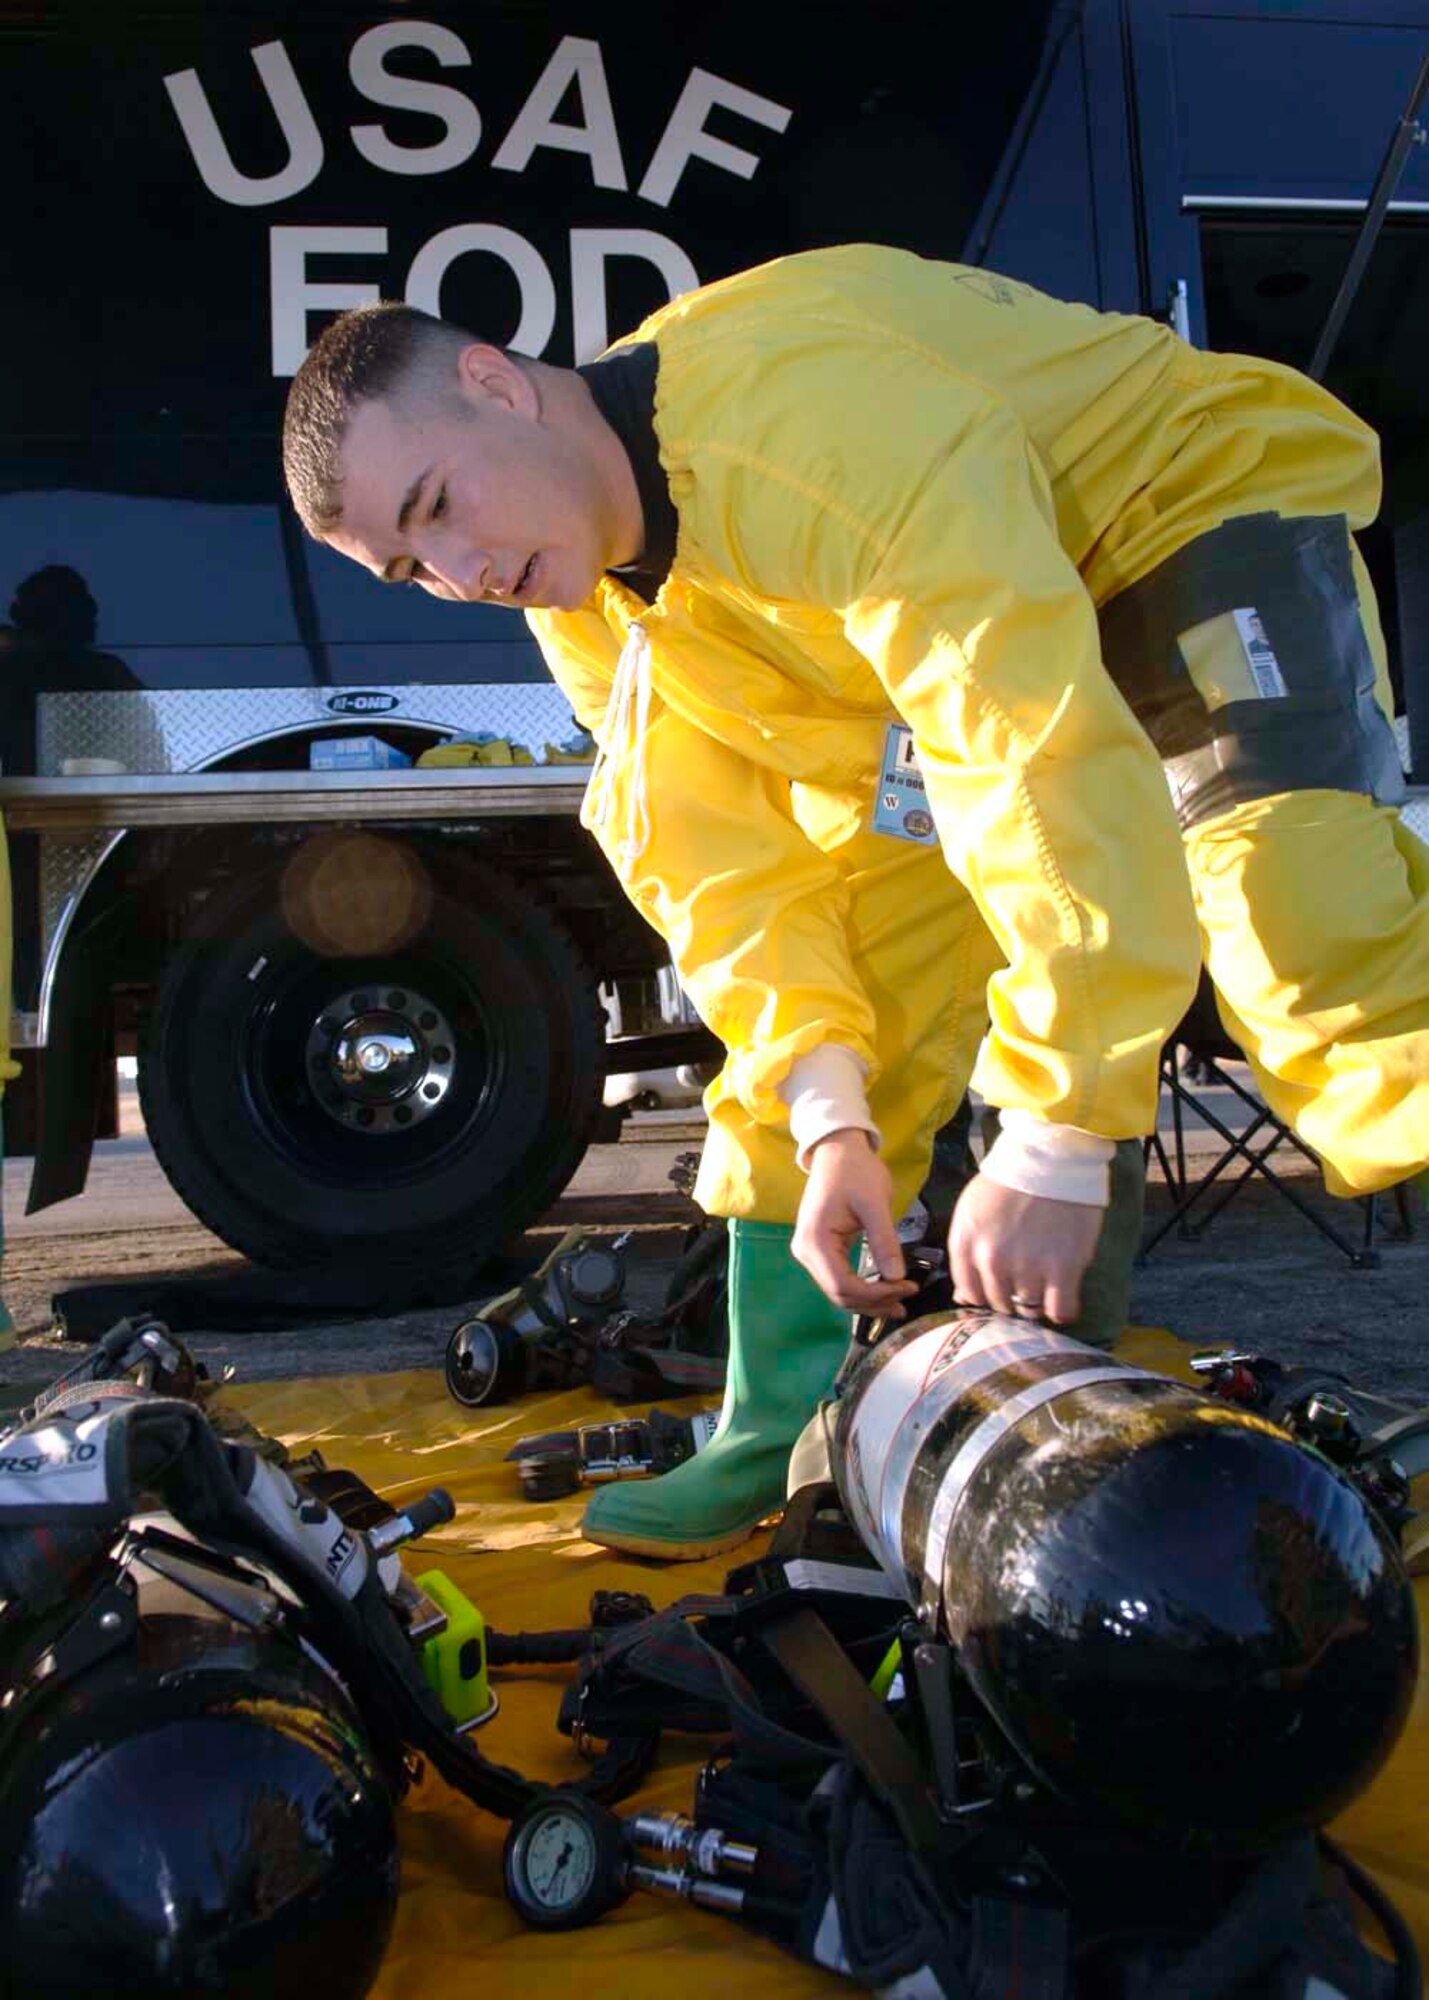 Staff Sgt. Richard Swann checks equipment as part of the initial setup entry procedures before going to search the wreakage of a simulated aircraft accident Dec. 4 at Davis-Monthan AFB, Ariz. Exercise Vigilant Shield 07 is a joint Department of Defense and federal nuclear weapon accident exercise. The exercise scenario involved a C-17 Globemaster III carrying four nuclear weapons to be diverted to Davis-Monthan AFB due to simulated engine failure that caused an aircraft accident. Sergeant Swann is an explosive ordnance disposal journeyman from the 355th Civil Engineering Squadron. (U.S. Air Force photo/Senior Airman Christina D. Ponte)